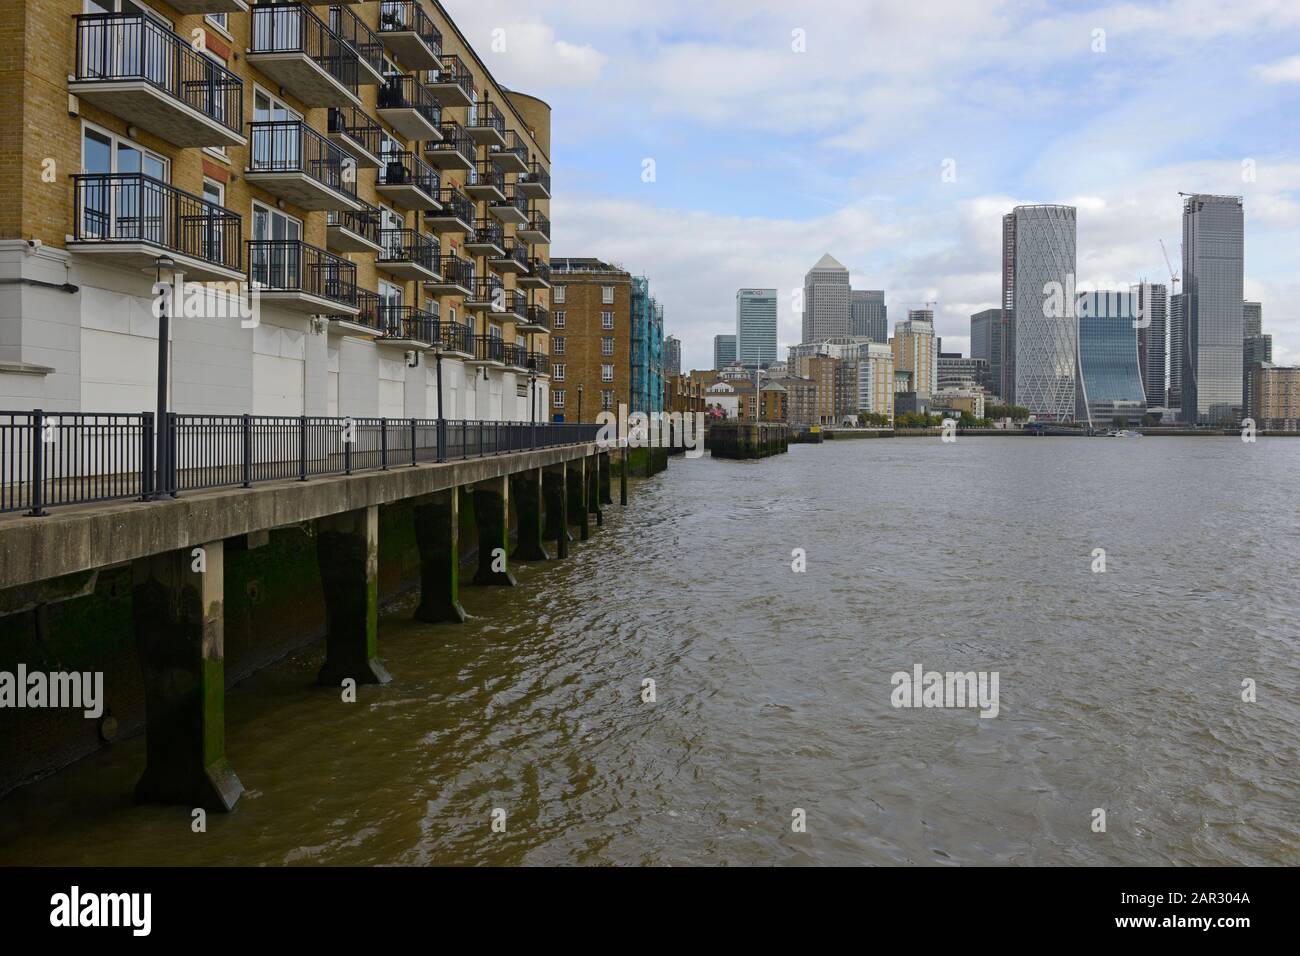 The buildings of Canary Wharf seen down the Thames river from Limehouse basin, London, UK Stock Photo